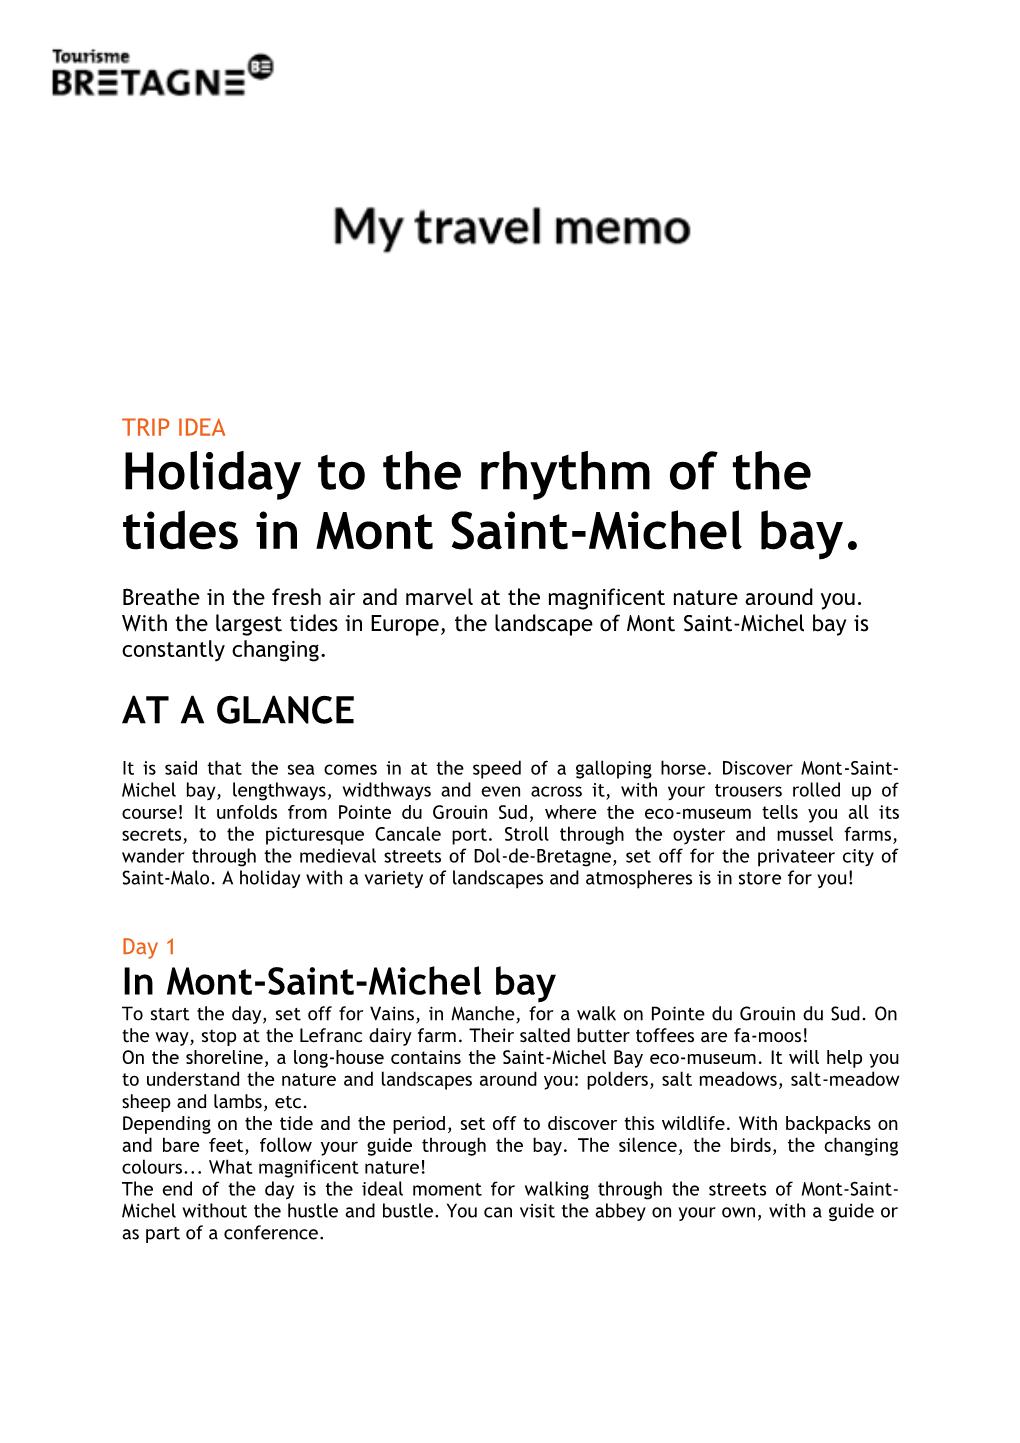 Holiday to the Rhythm of the Tides in Mont Saint-Michel Bay